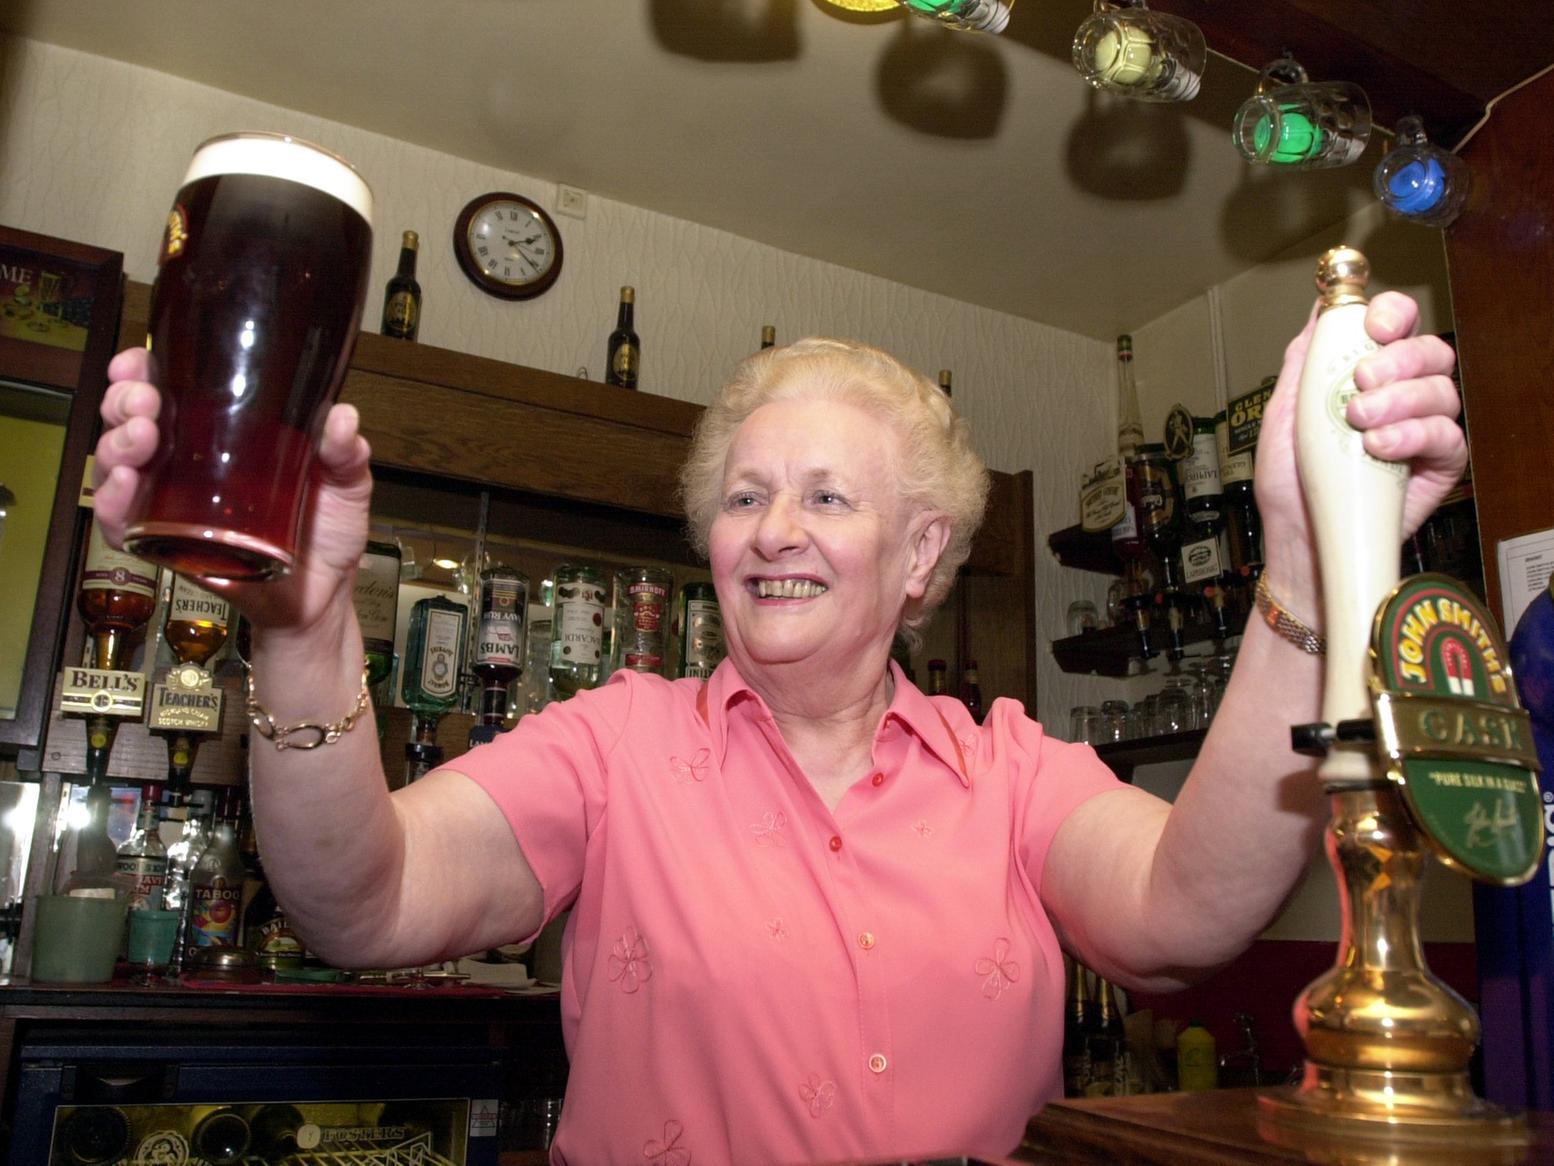 This is Adele Perkins who pulled her last pint at the Royal Oak in Aberford before retiring. She was born at the pub and lived and worked their all her life.